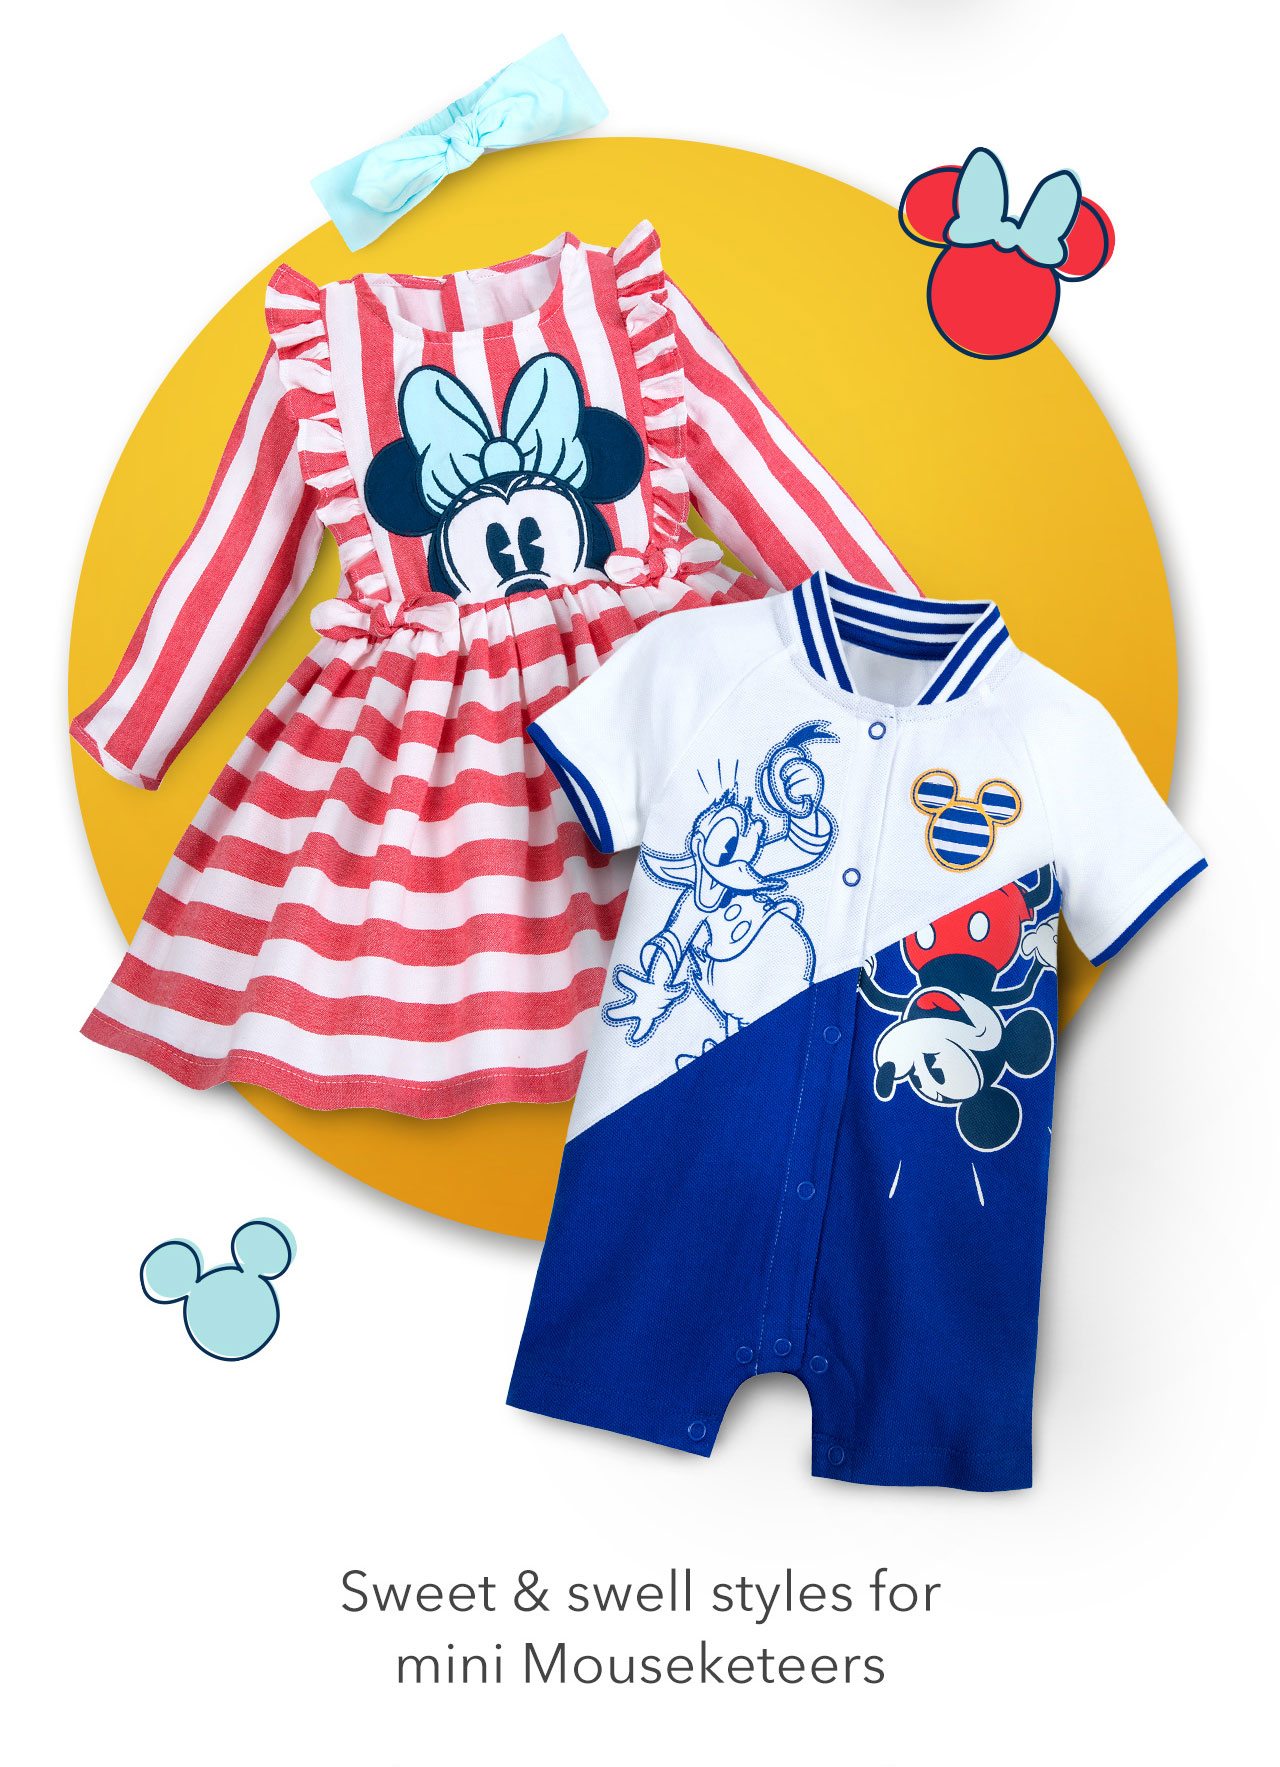 Sweet & swell styles for mini Mouseketeers